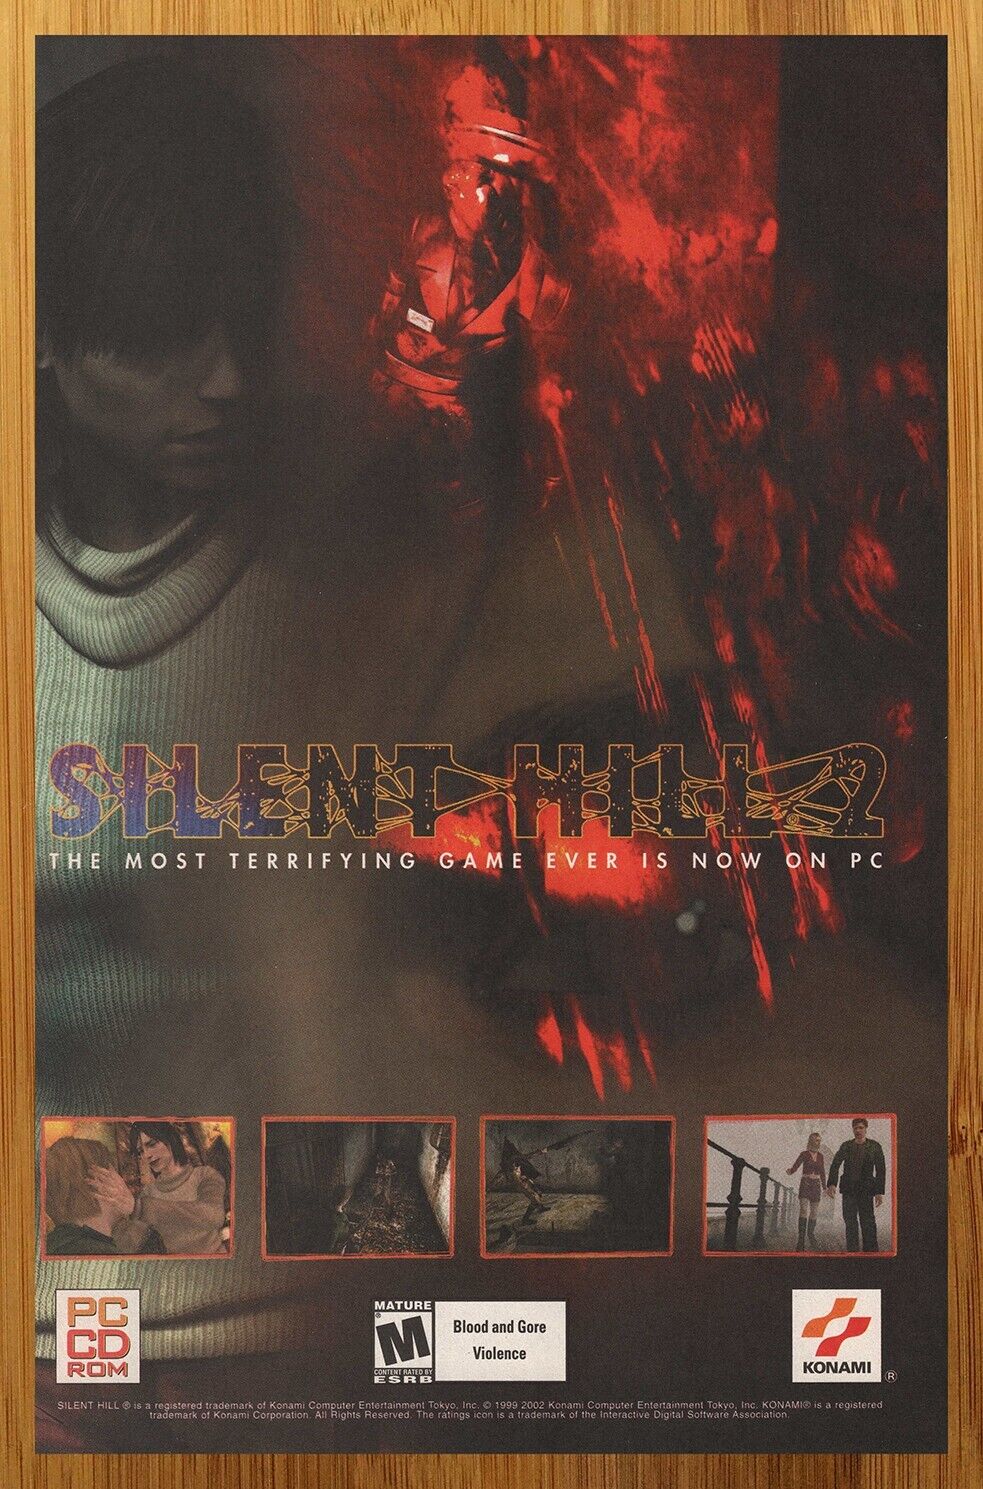 2001 Silent Hill 2 PC PS2 Playstation 2 Vintage Print Ad/Poster Horror Game Art